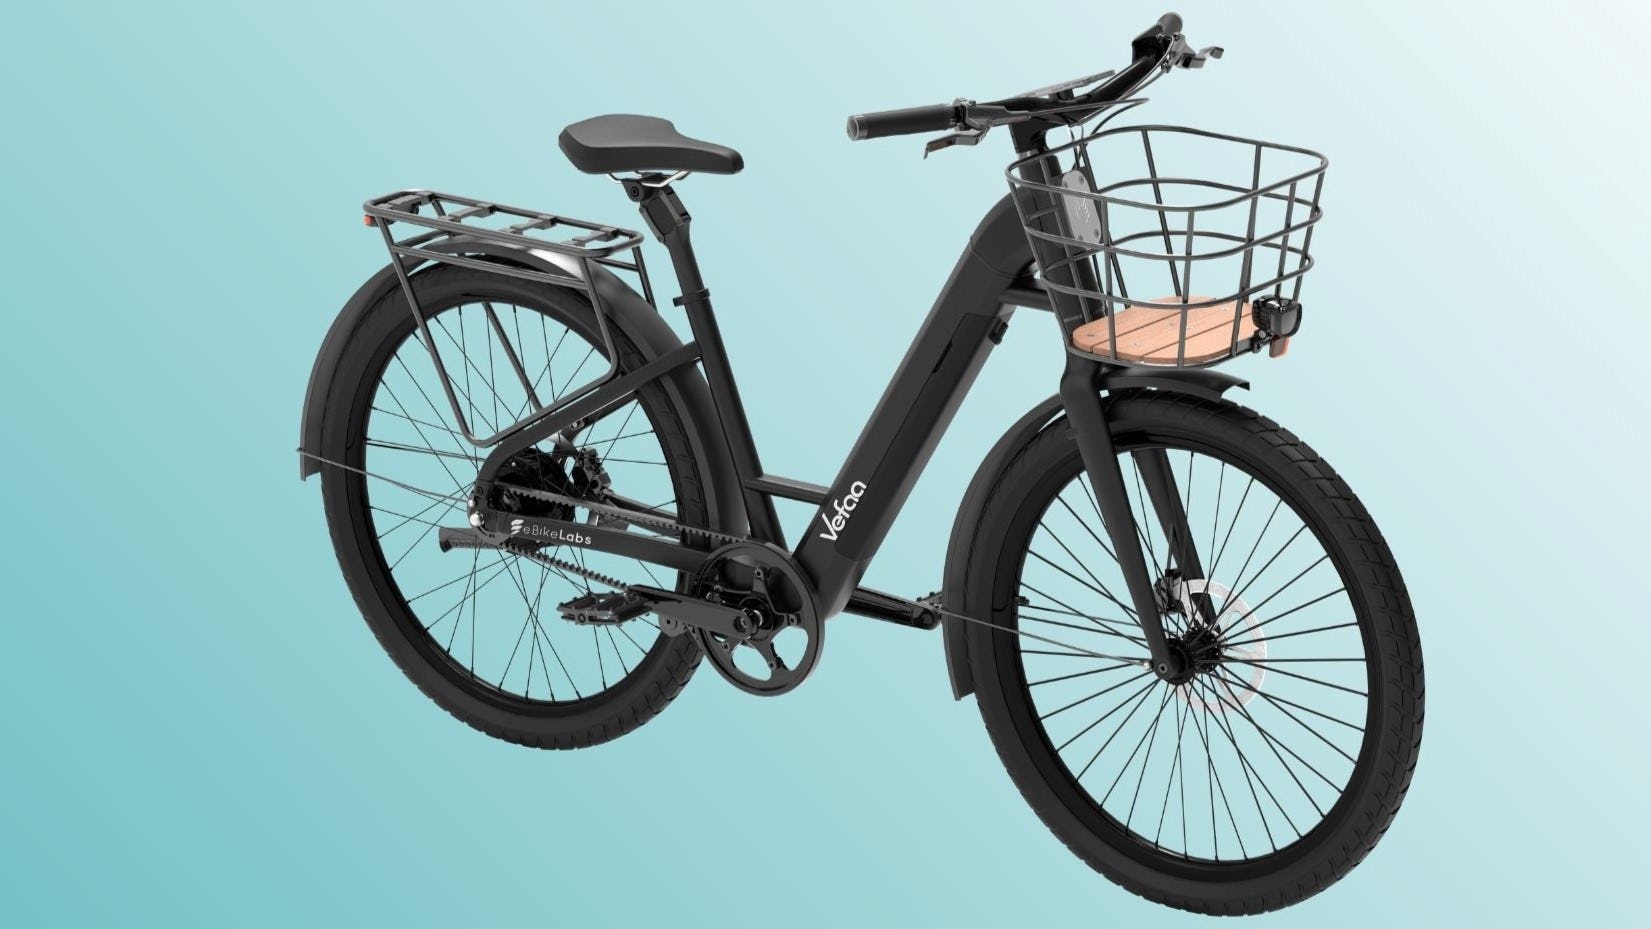 Vefaa has adopted the eBikeLabs technology eBikeOS. This software features embedded AI that reduces and enhances hardware components with software. - Photo Vefaa